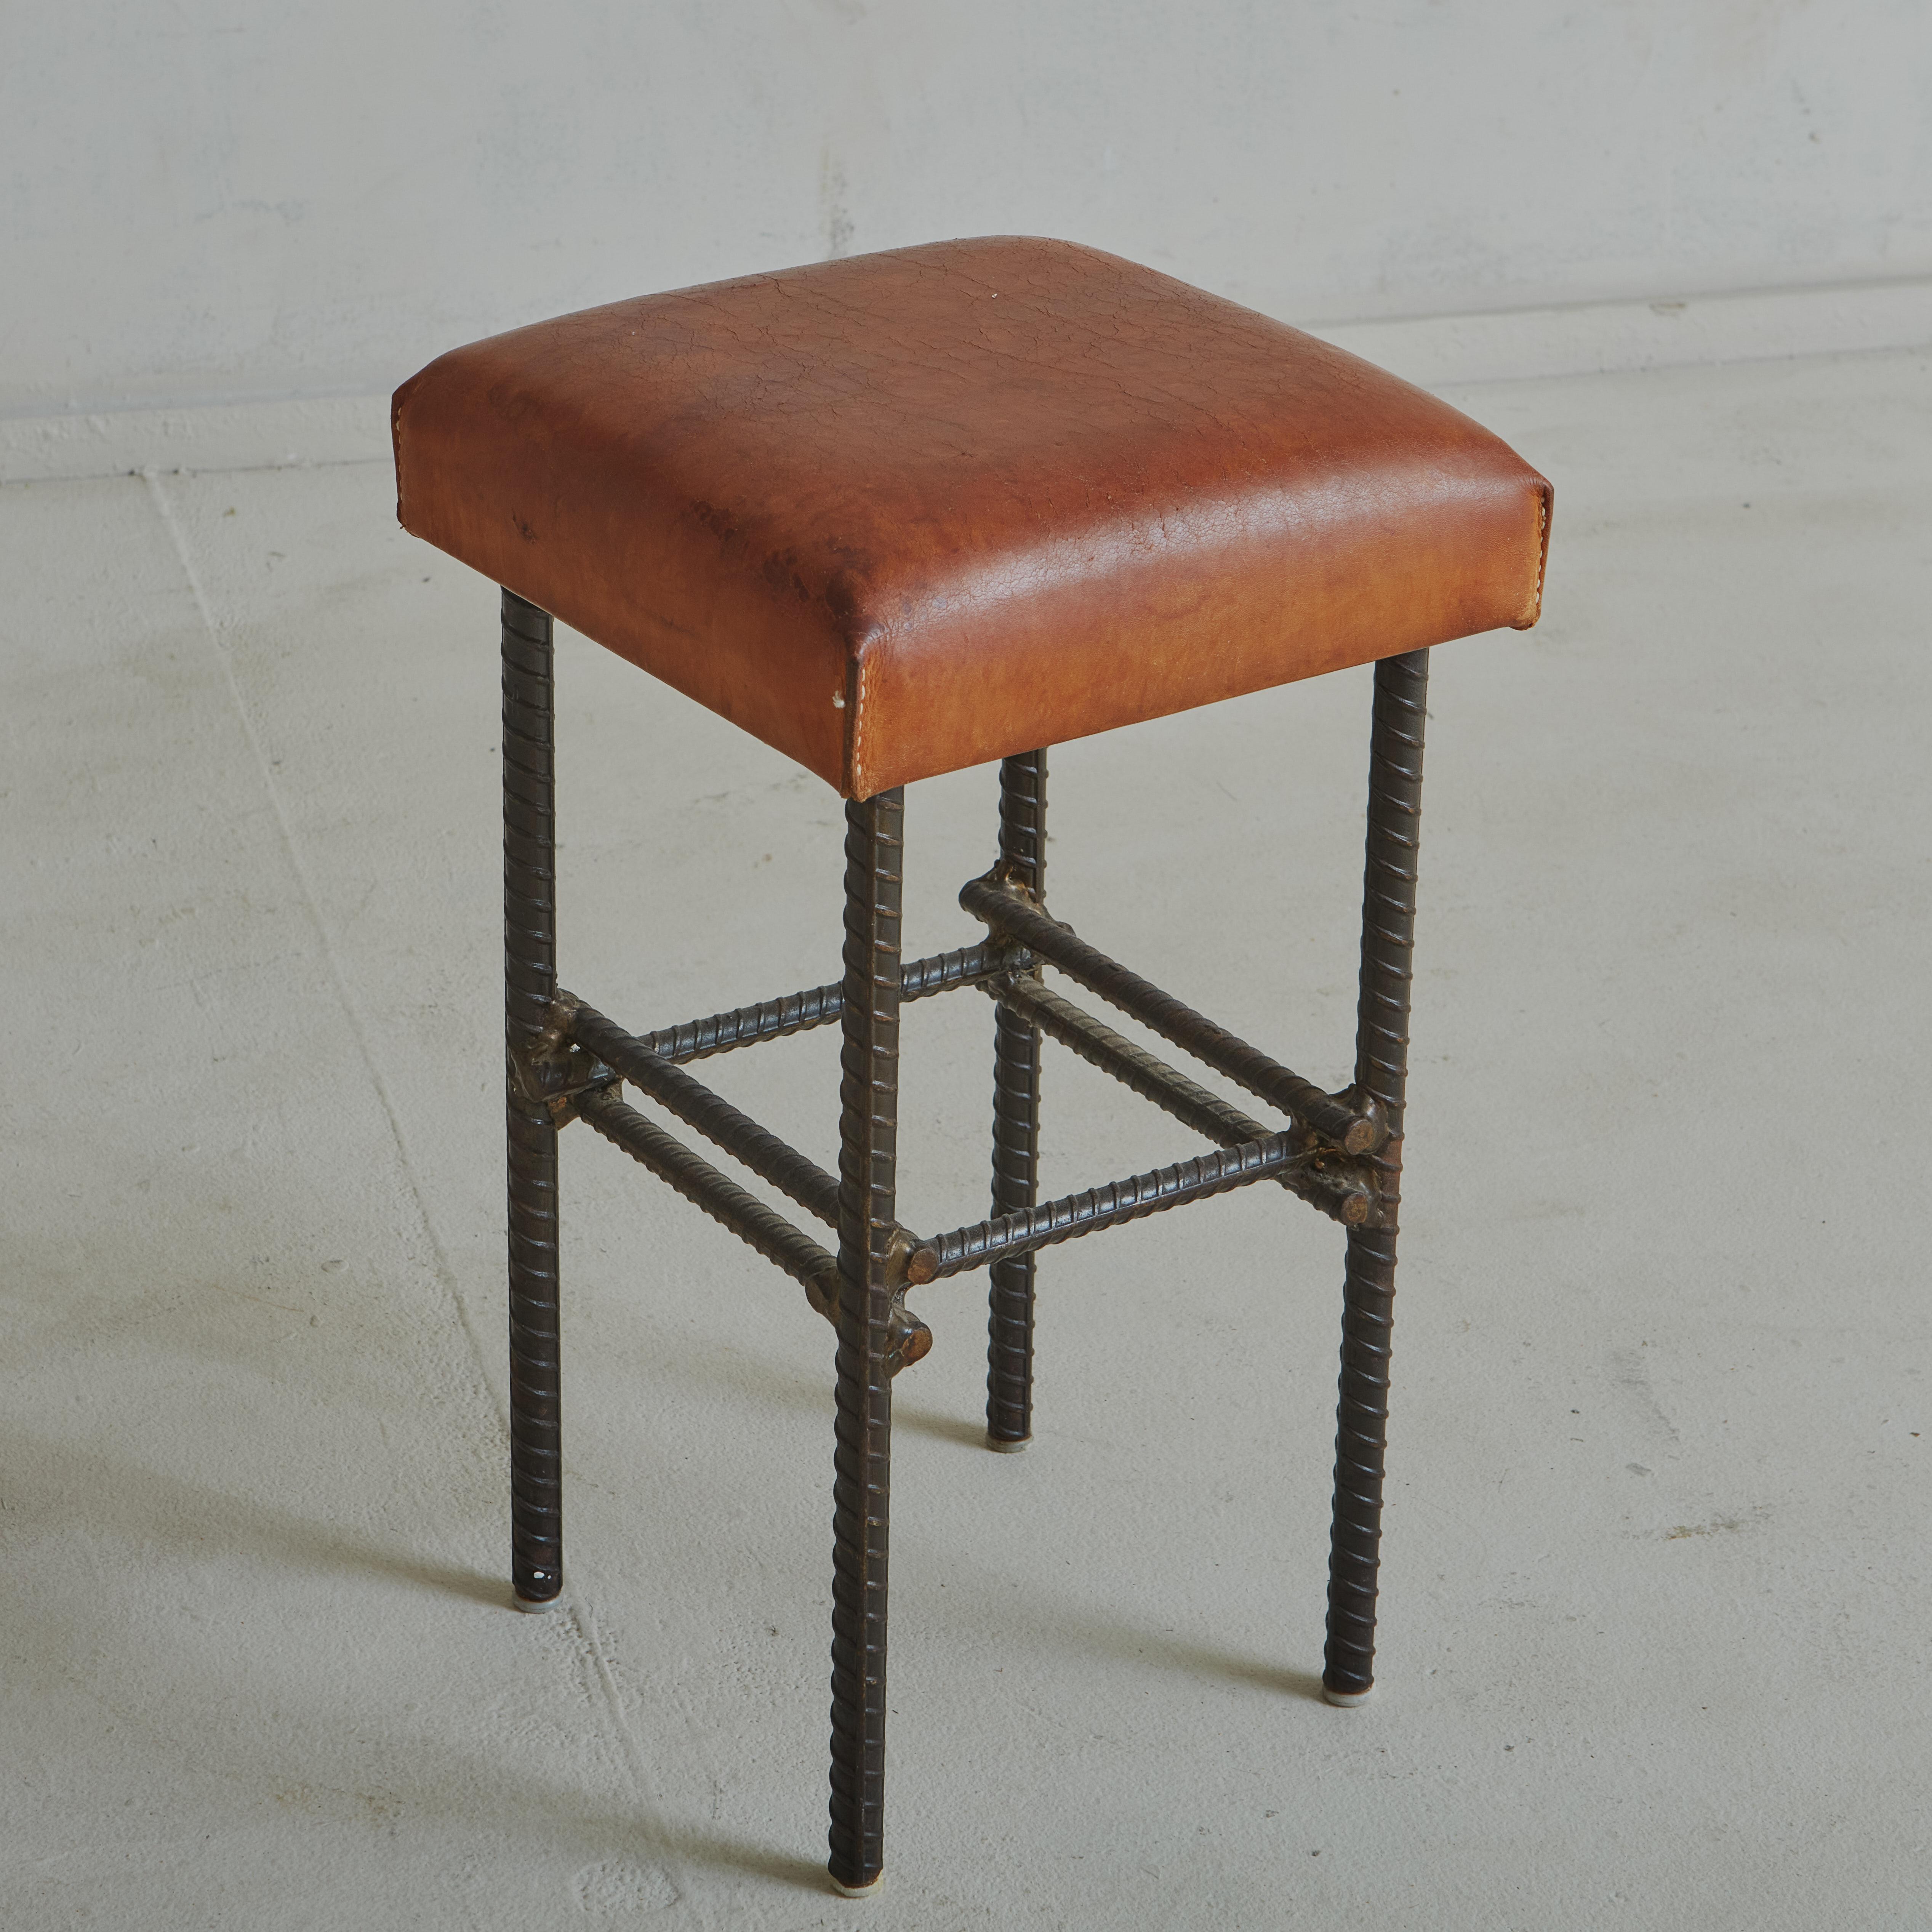 Beautiful brutalist stool with welded forged iron base and a brown leather seat featuring a gorgeous patina created by time.

Brutalism is an architectural current, born in the 1950s in England, seen as the overcoming of the Modern Movement in